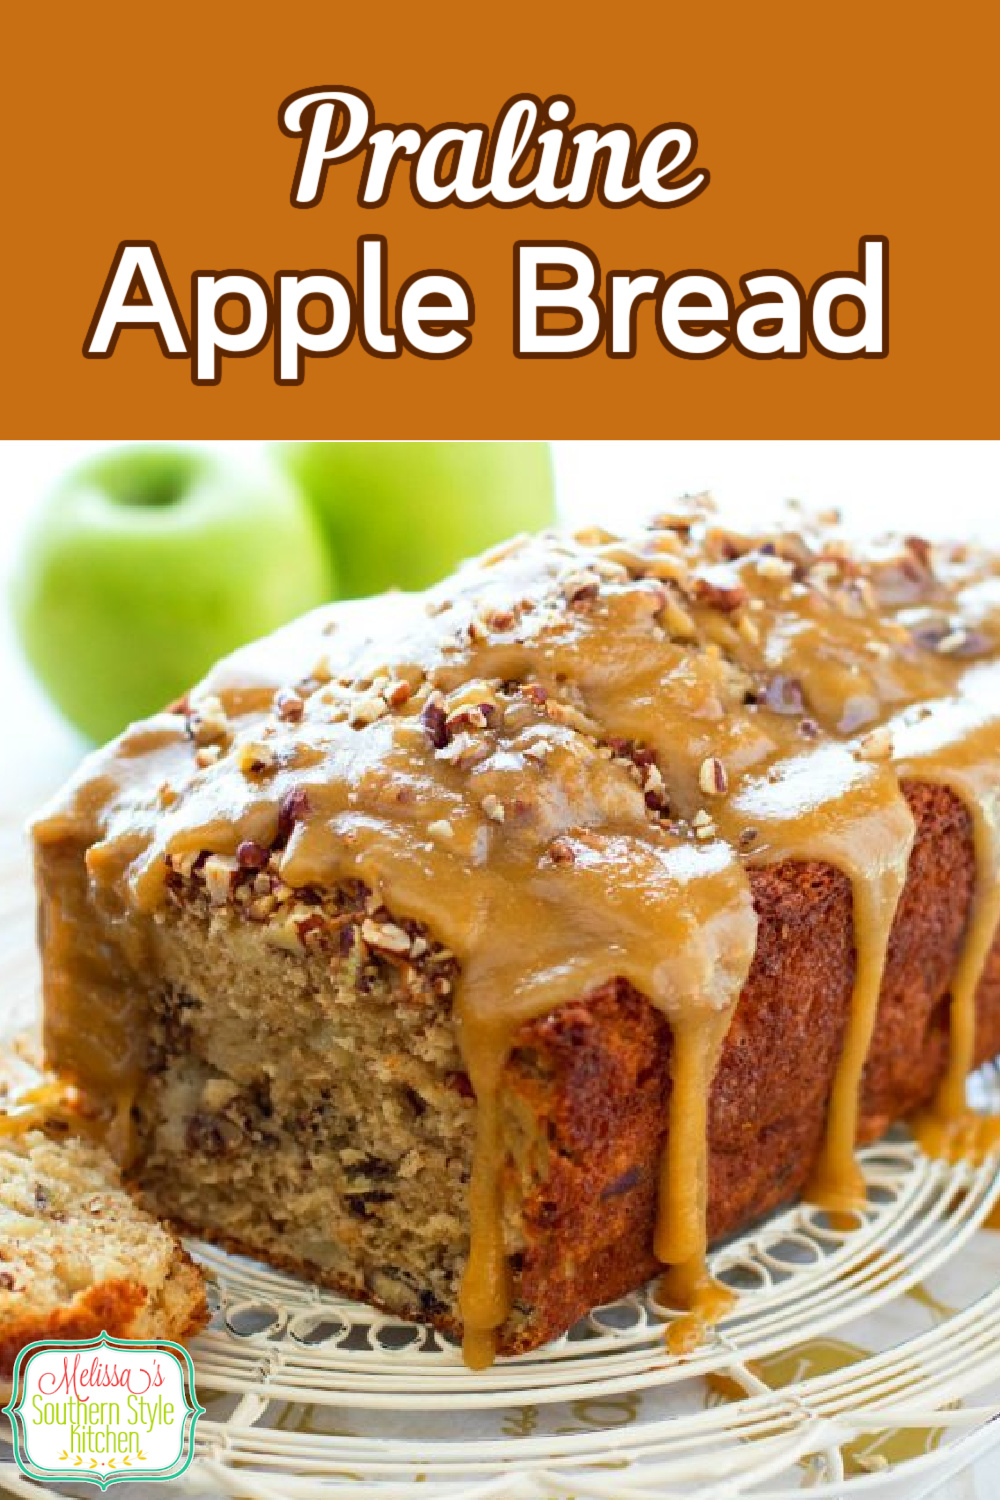 This decadent Praline Apple Bread is the epitome of indulgence. Enjoy it for breakfast, brunch or as a mid-morning treat #applebread #pralineapplebread #apples #applerecipes #harvestapplebread #quickbreadrecipes #brunch #breakfast #holidaybaking #fallrecipes #breadrecipes #apple #southernfood #southernrecipes